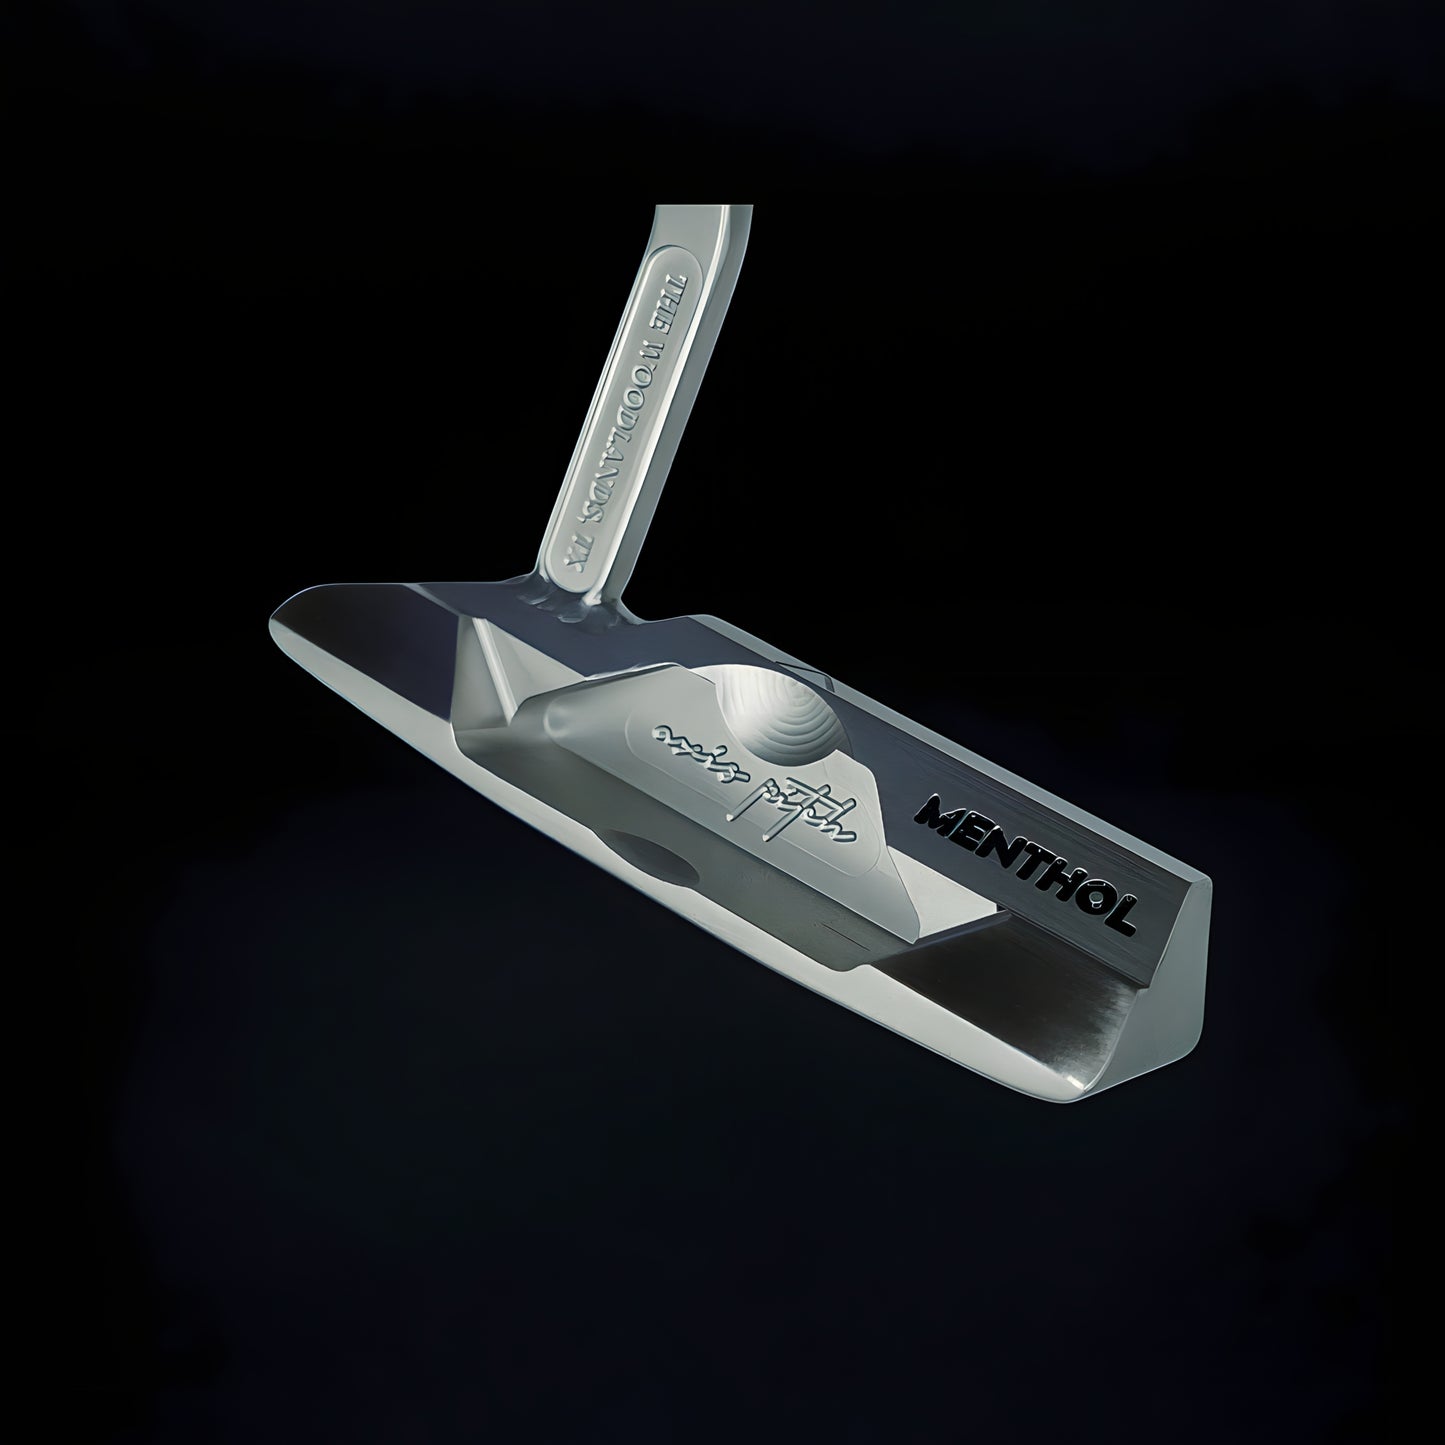 The Tried-and-True approach: Our team has accomplished the design of a putter that demonstrates smooth yet complex geometry, while maintaining the traditional face-milling and club-feel you know and love. A powerful blade putter to eliminate all 3 putts. 100% American made start to finish in The Woodlands, TX. 